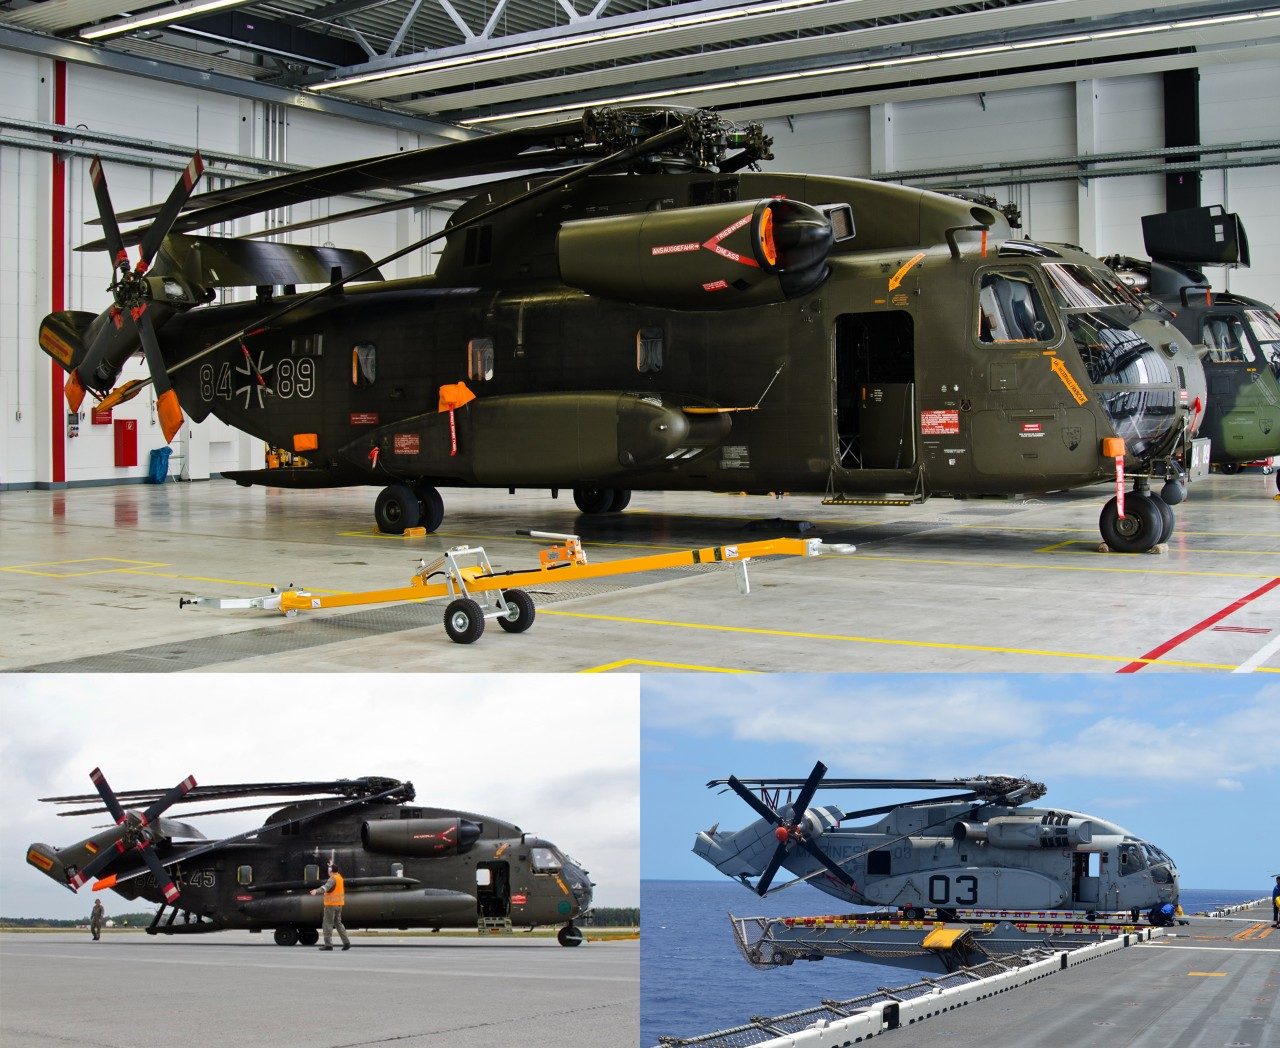 The CH-53G and the CH-53K both utilize an automatic blade/pylon fold system  to reduce the footprint of the aircraft for storage on ships or in restricted hangar structures. This procedure is still used regularly at all CH-53G bases across Germany.